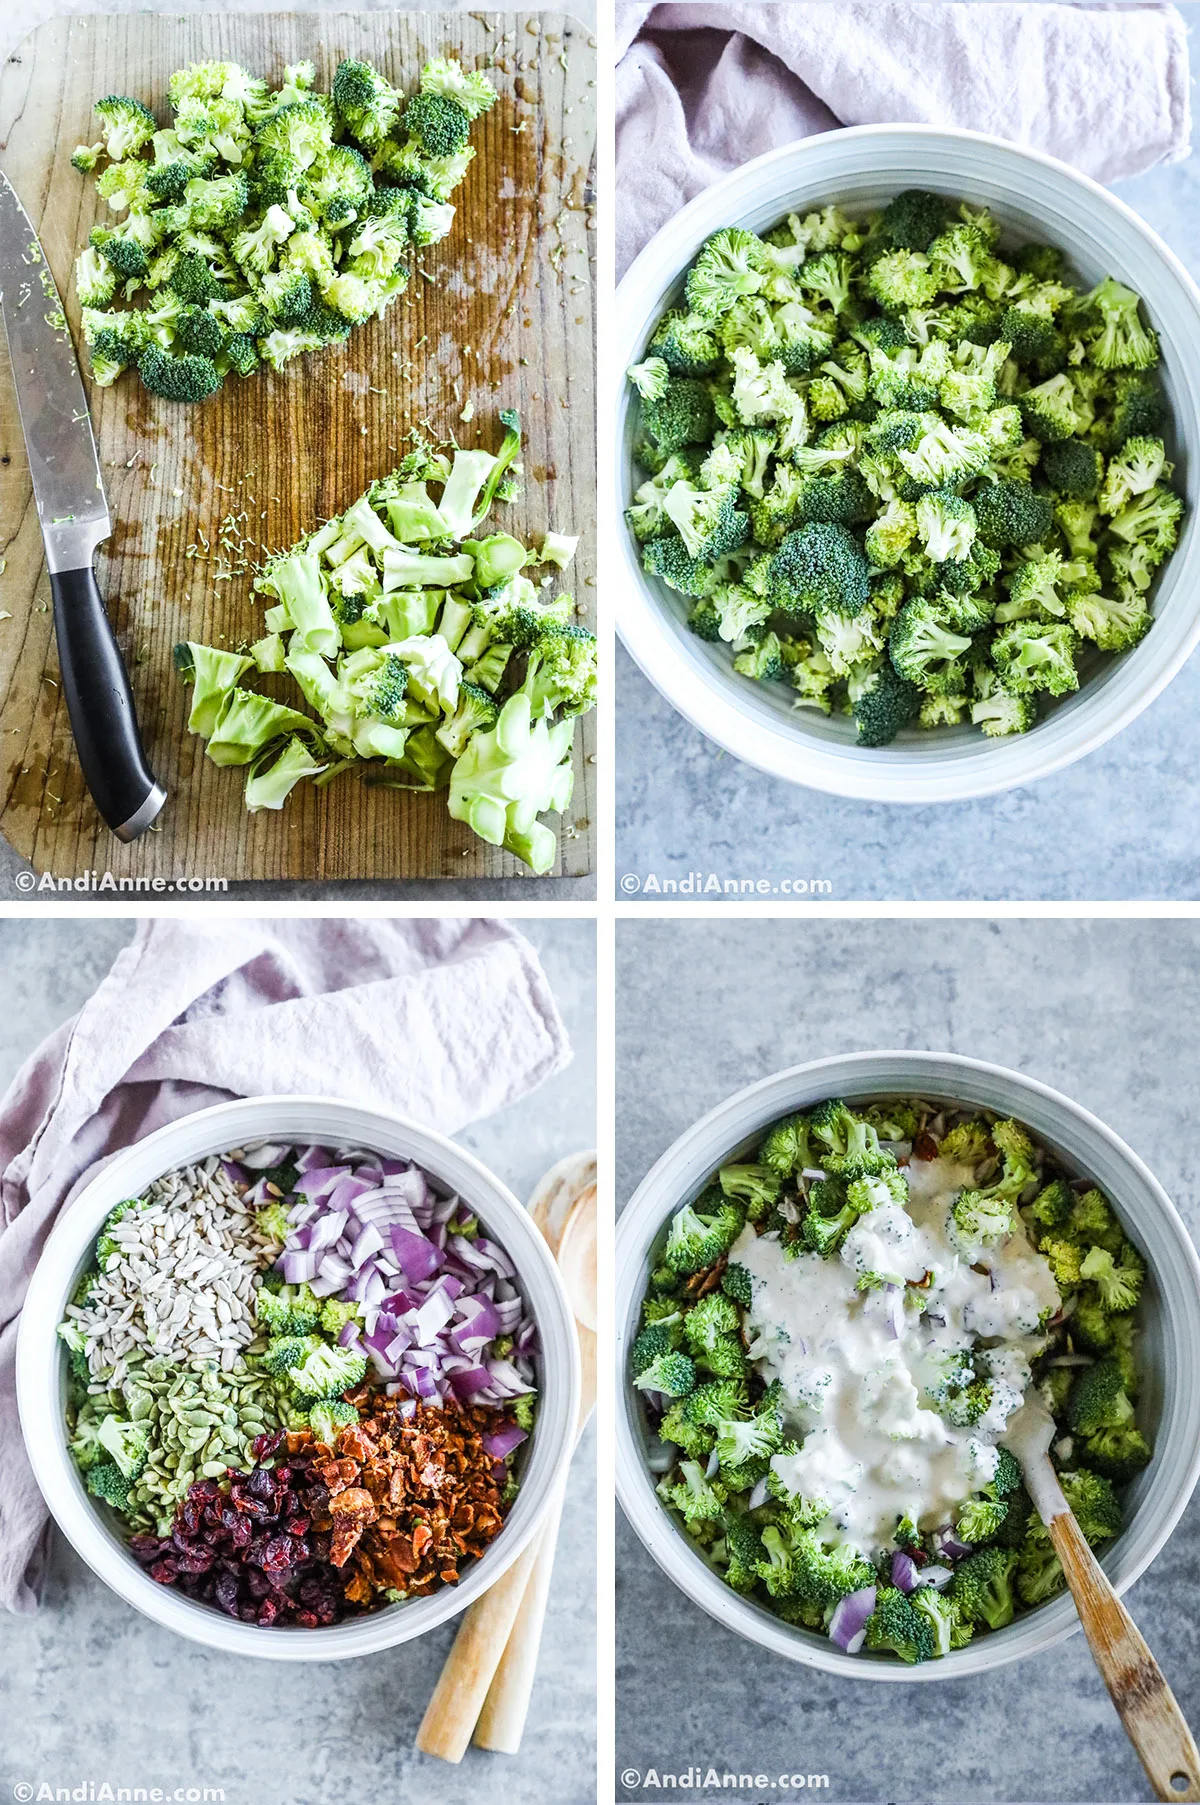 Four images grouped together including chopped broccoli florets, a bowl of broccoli florets, various ingredients in a large bowl, and broccoli florets in a bowl with creamy sauce on top.